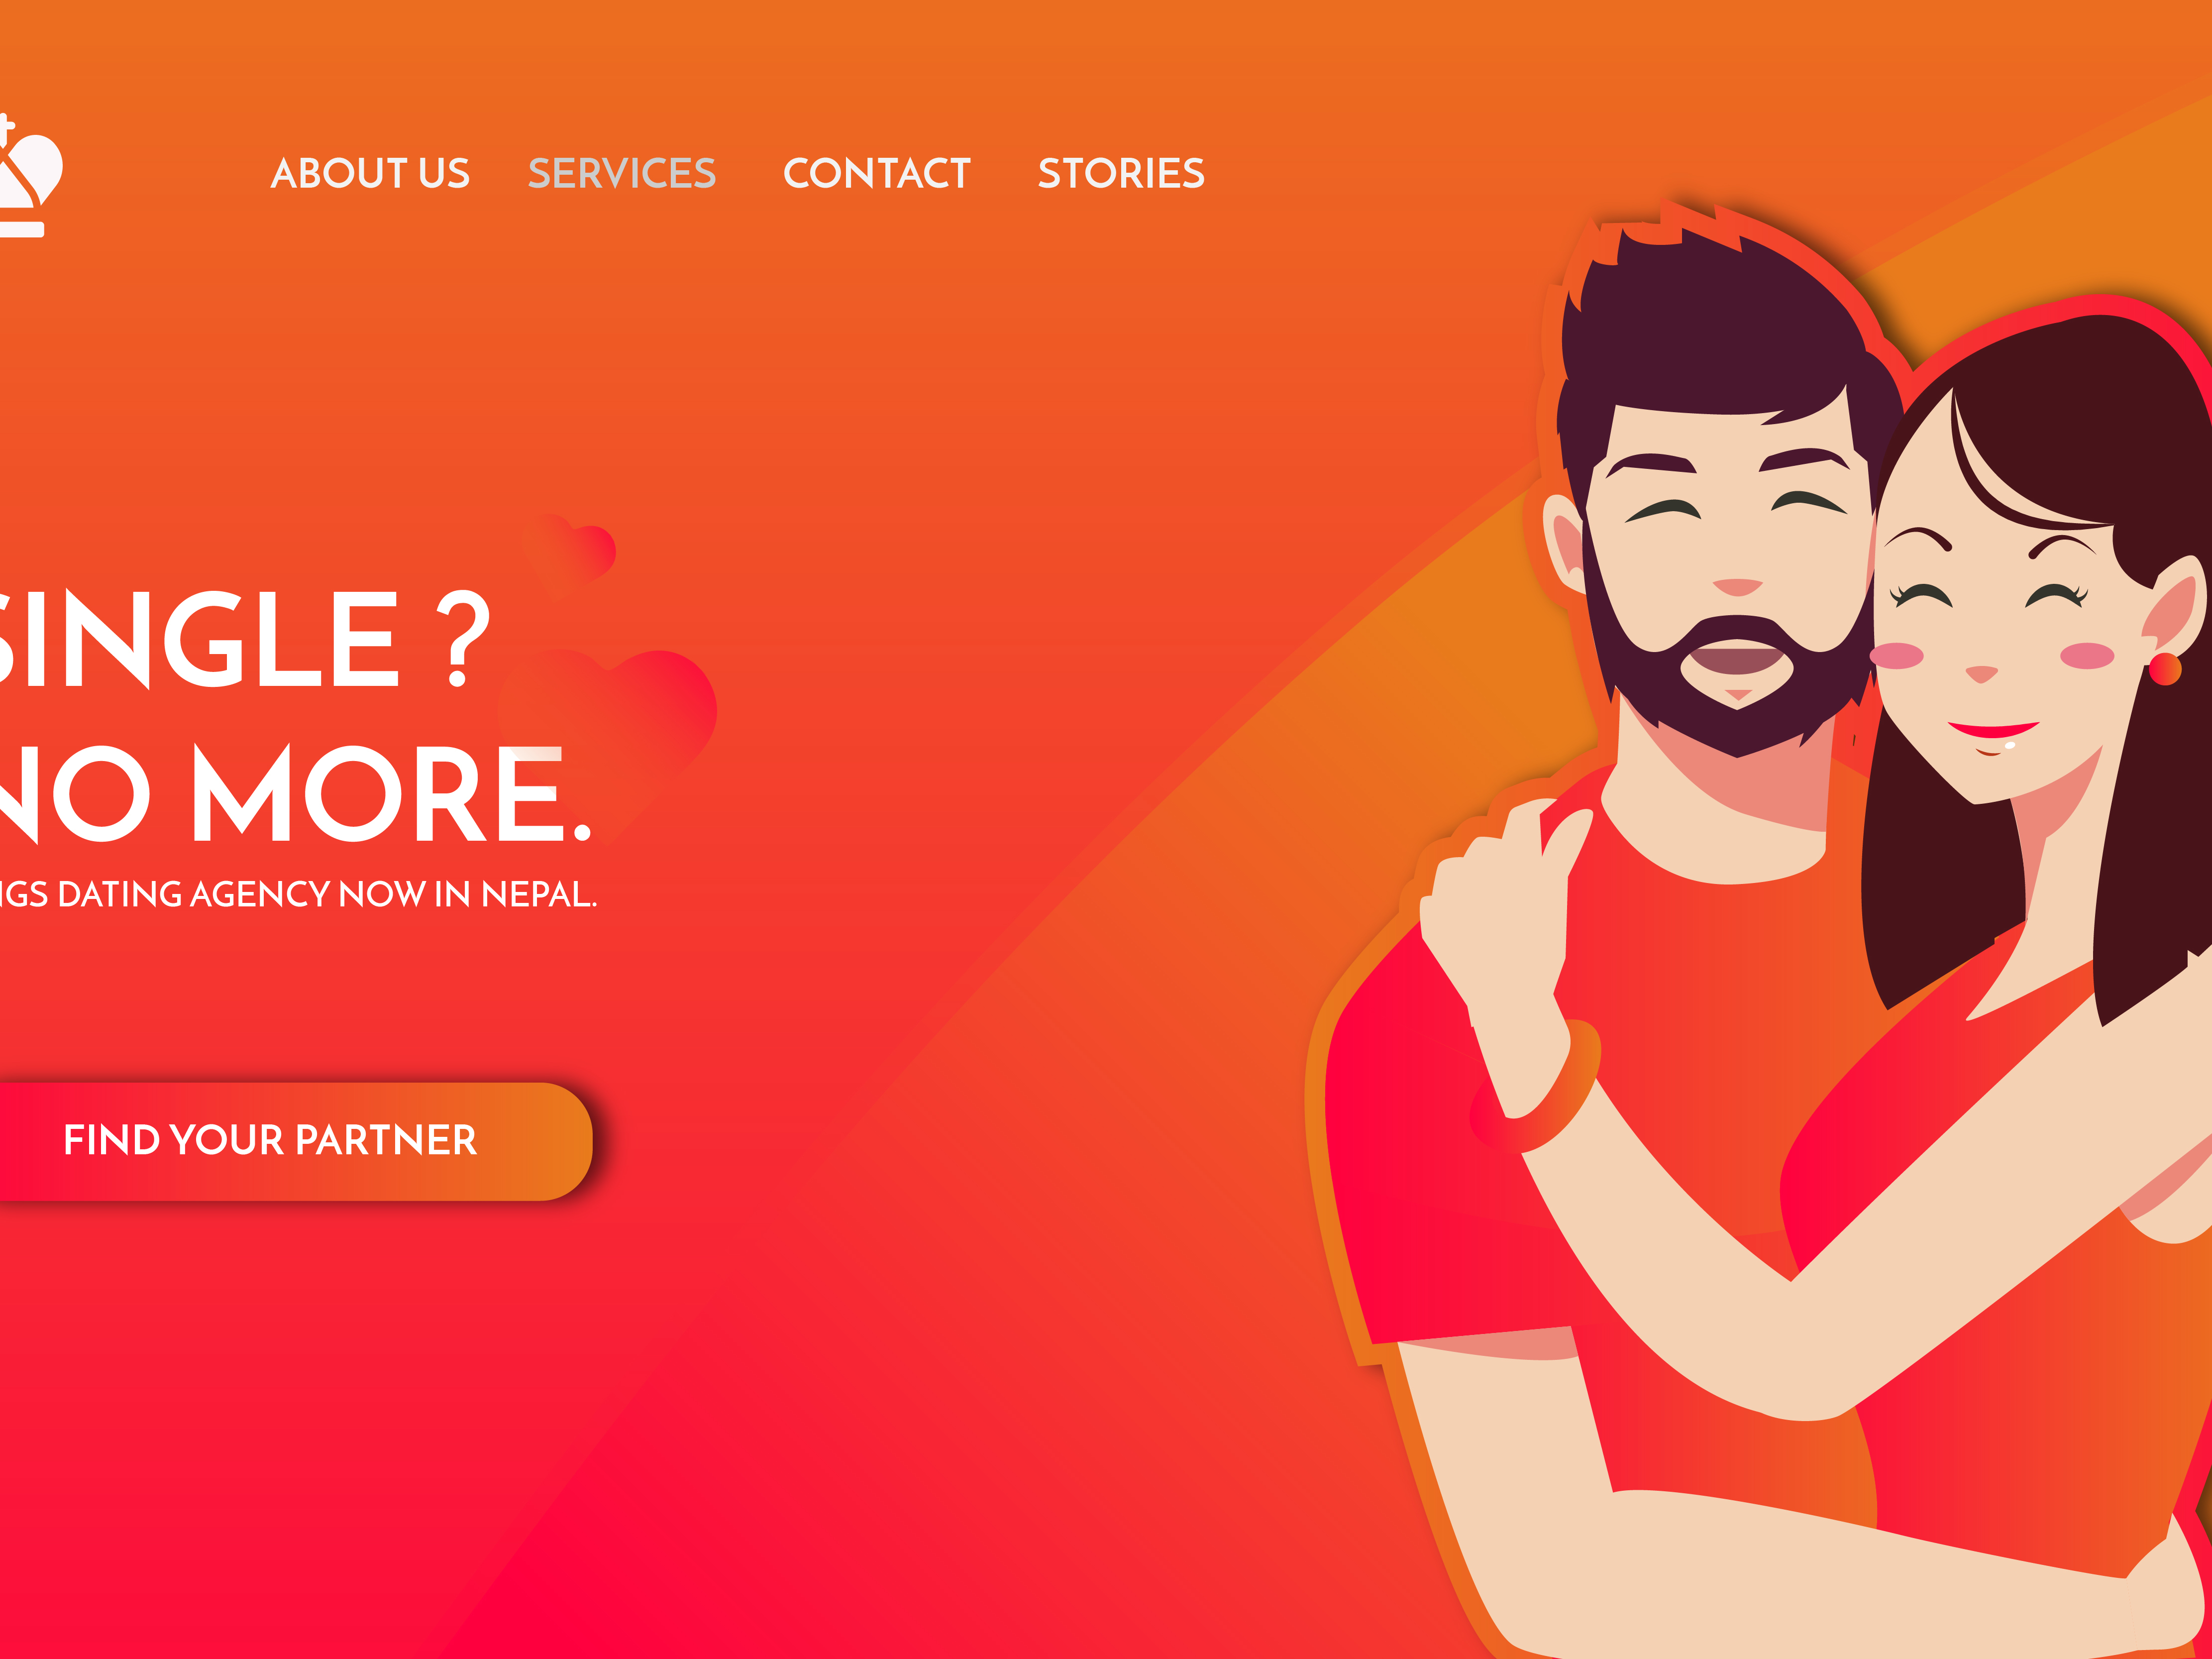 Dating Landing Page - Online Dating Agency Responsive Landing Page Design D...